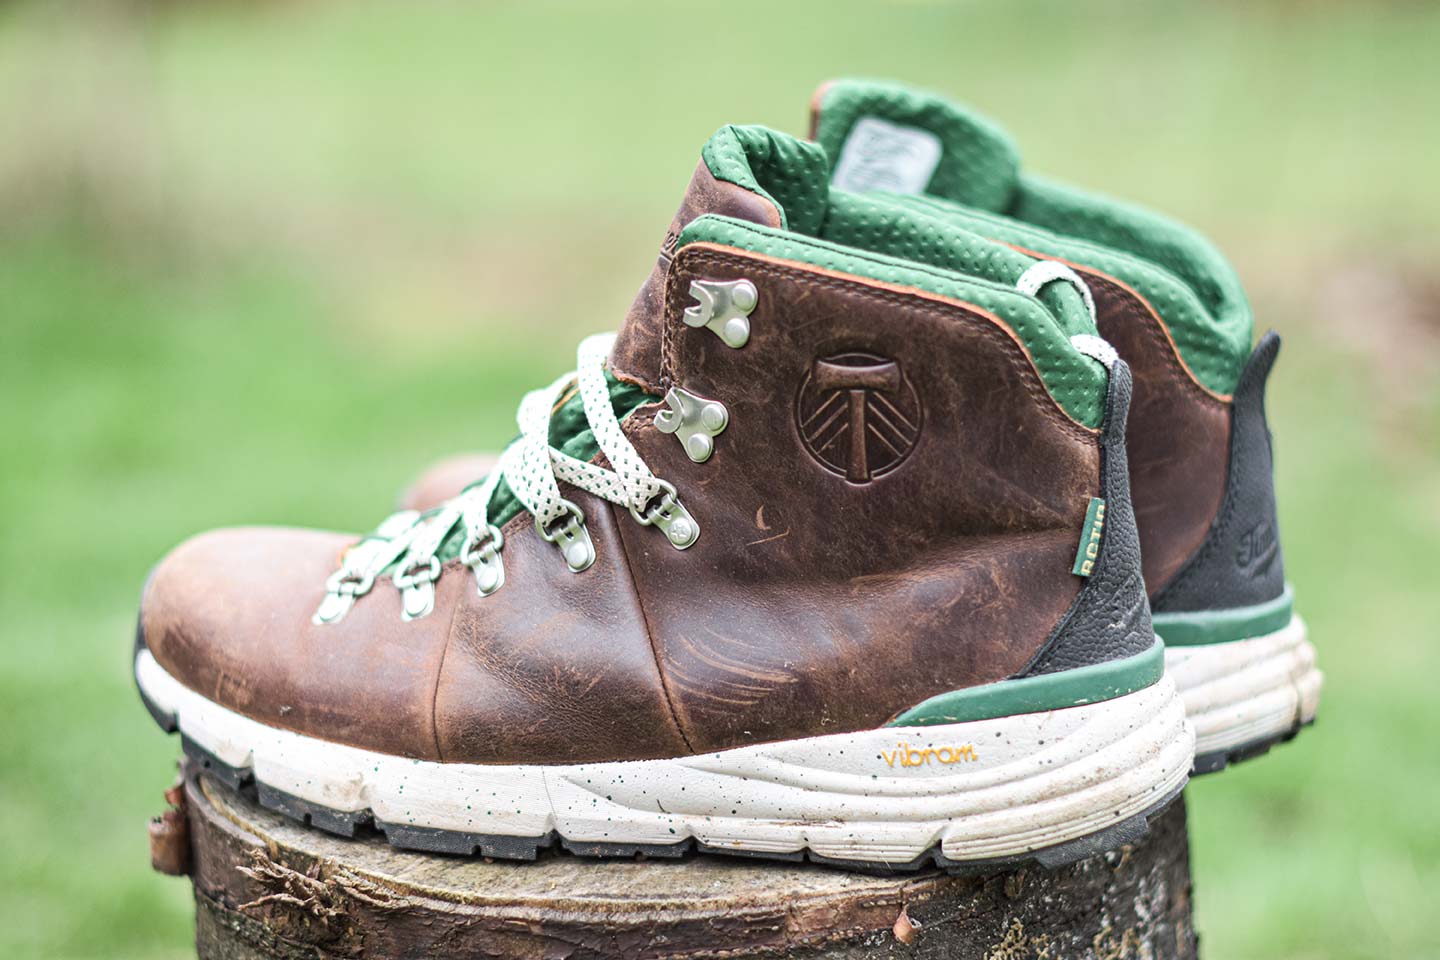 Dark brown boots with the Portland Timbers logo on the side and green laces with a white sole